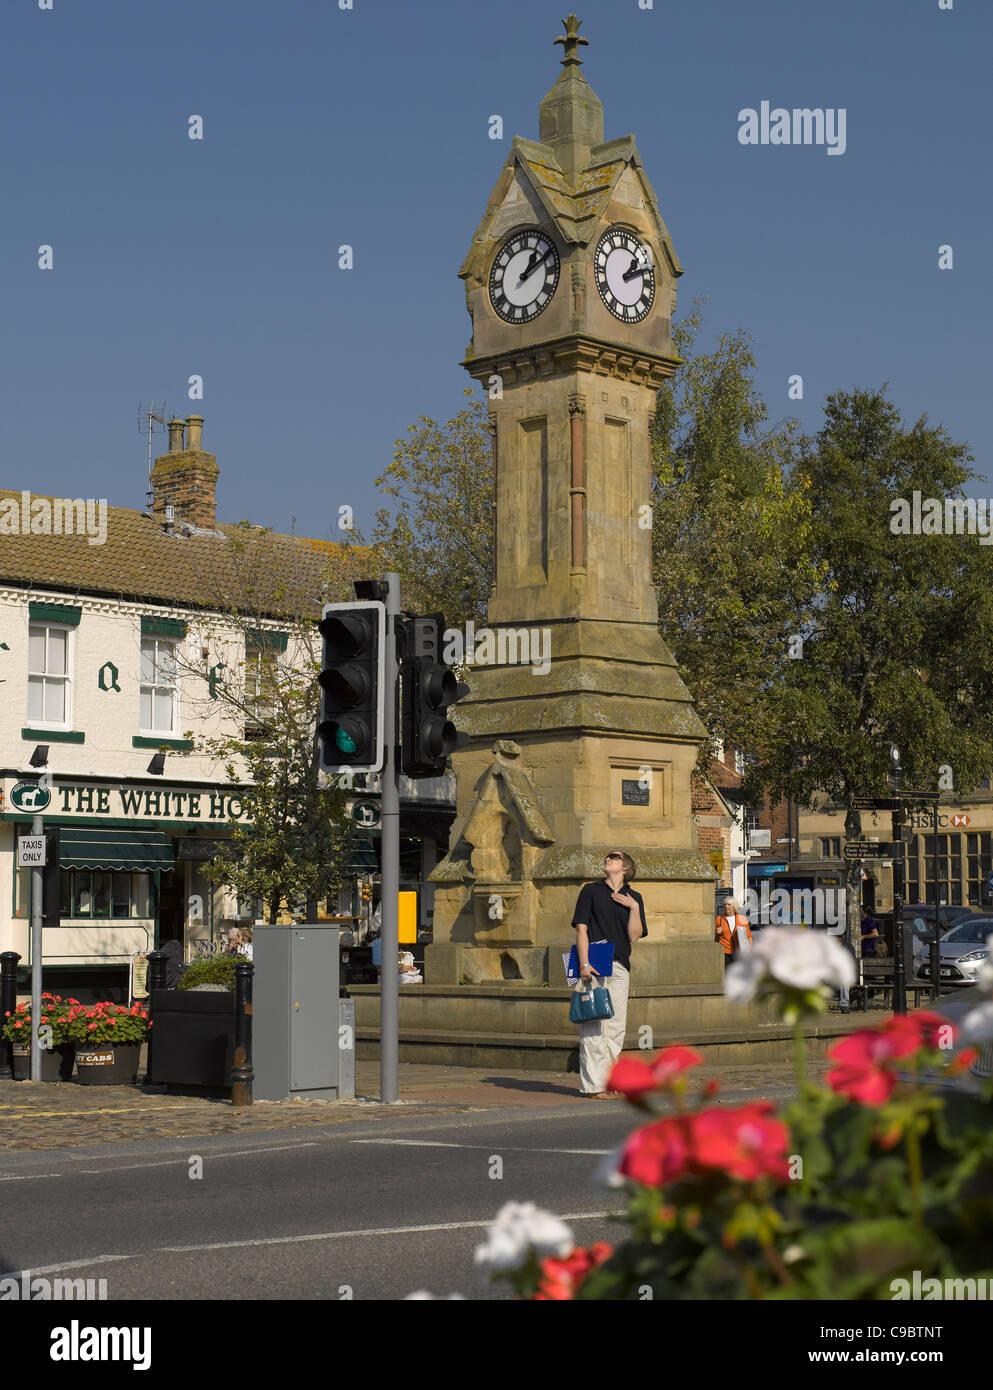 Waiting to cross the road near the Clock Tower in Market Place Thirsk North Yorkshire England UK United Kingdom GB Great Britain Stock Photo